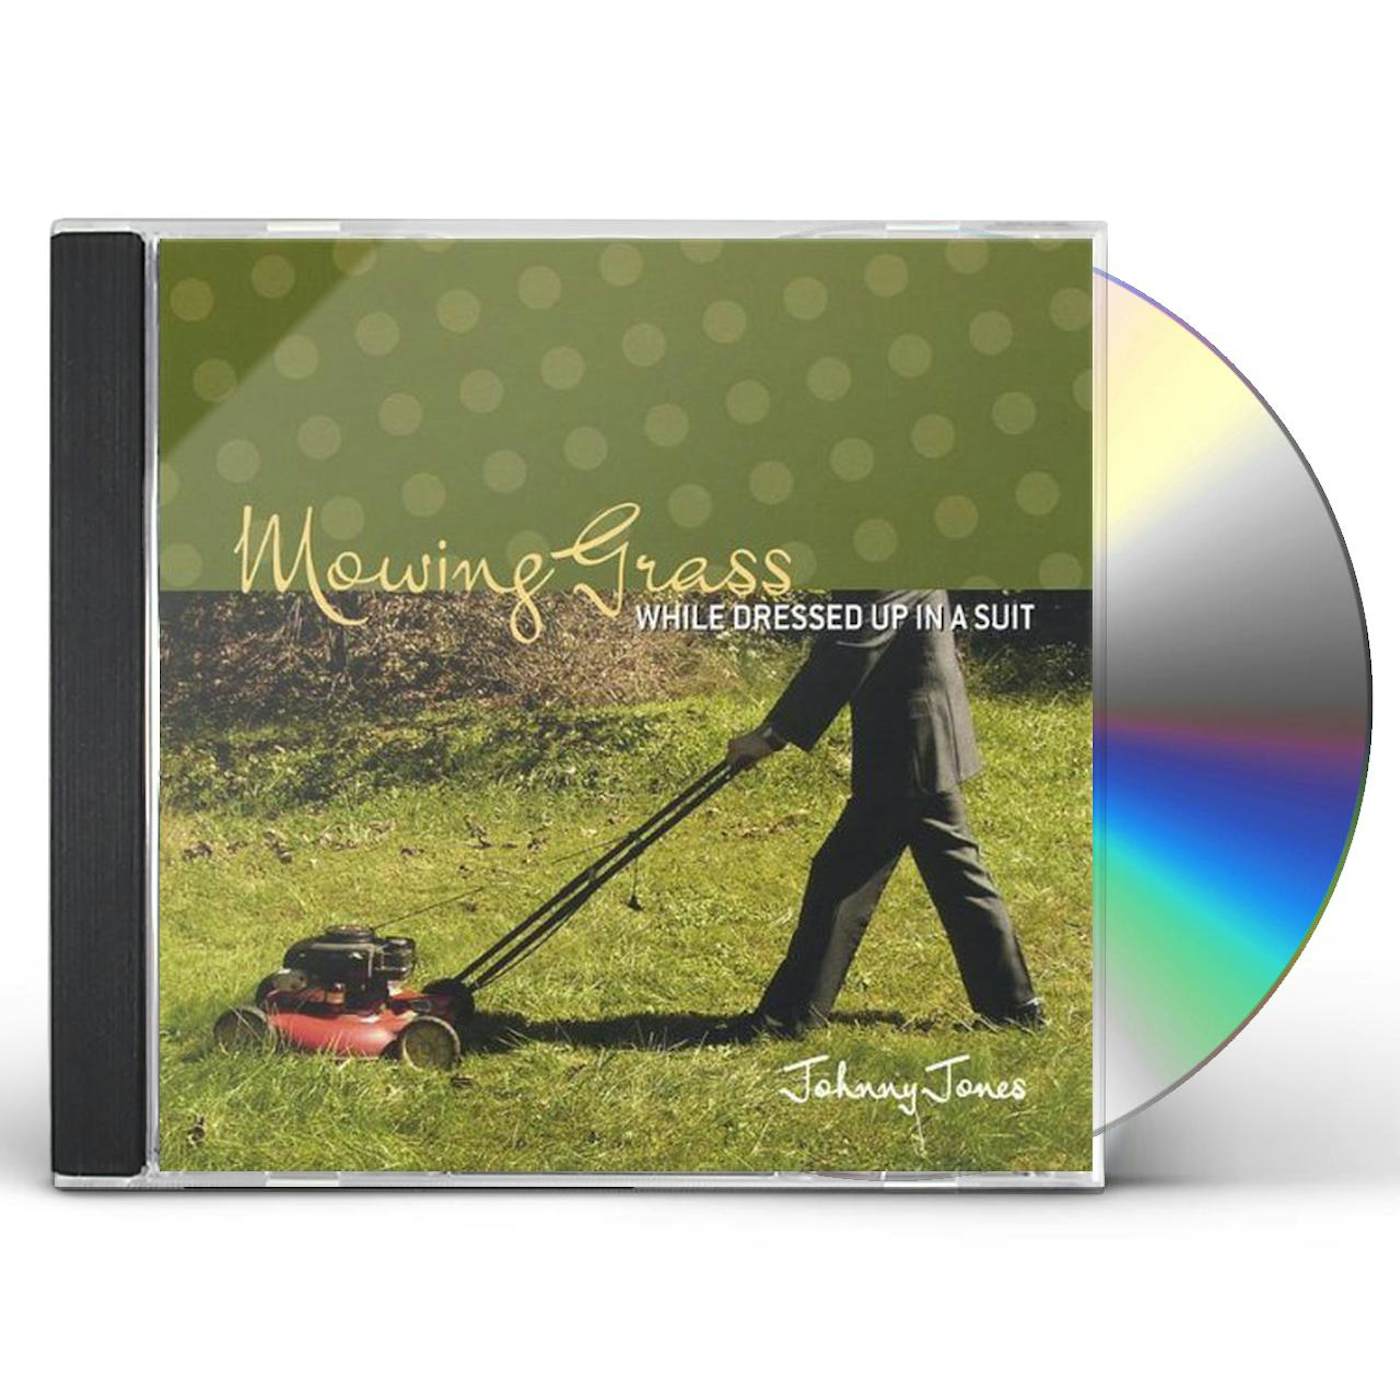 Johnny Jones MOWING GRASS WHILE DRESSED UP IN A SUIT CD